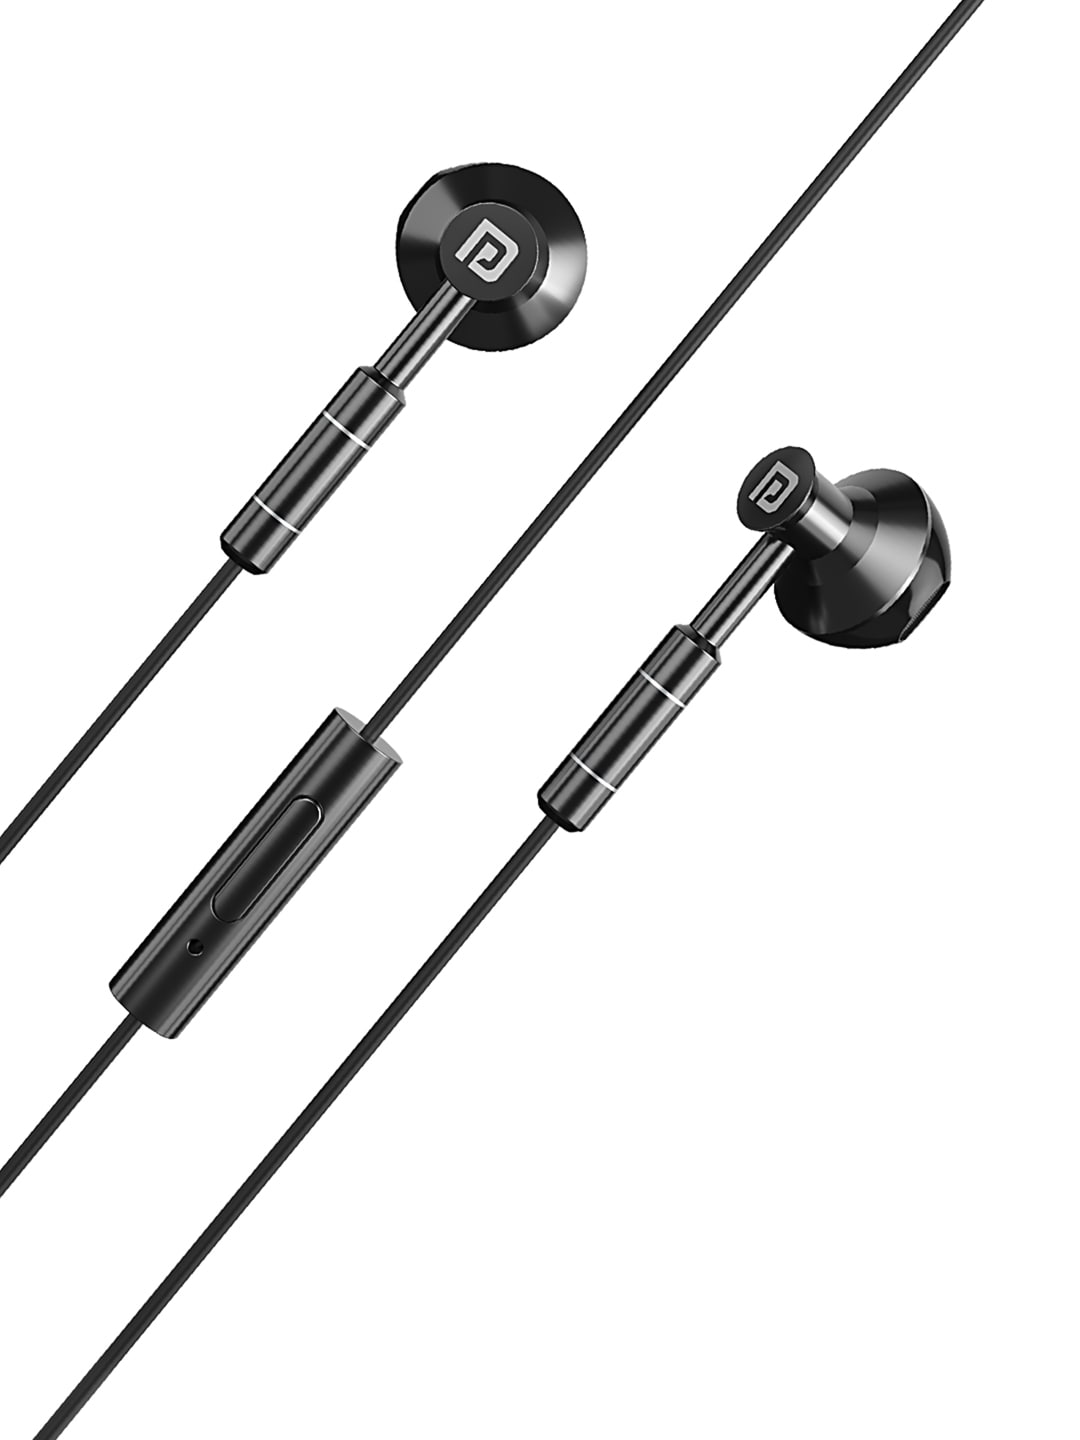 Portronics Black Solid In-Ear Wired Earphone Price in India